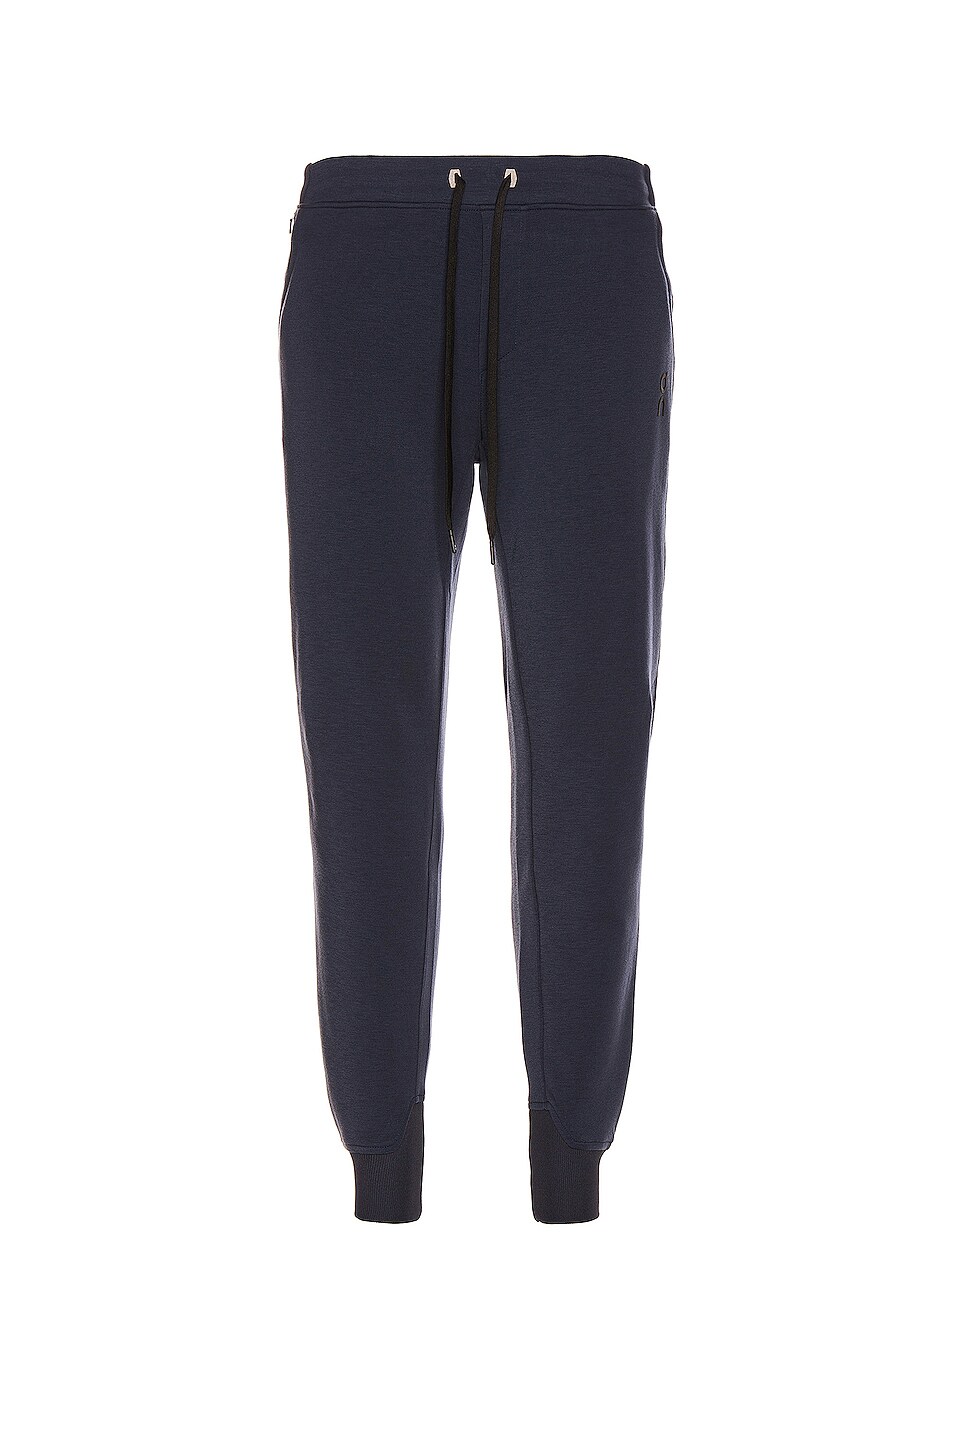 Image 1 of On Sweat Pants 2.0 in Navy